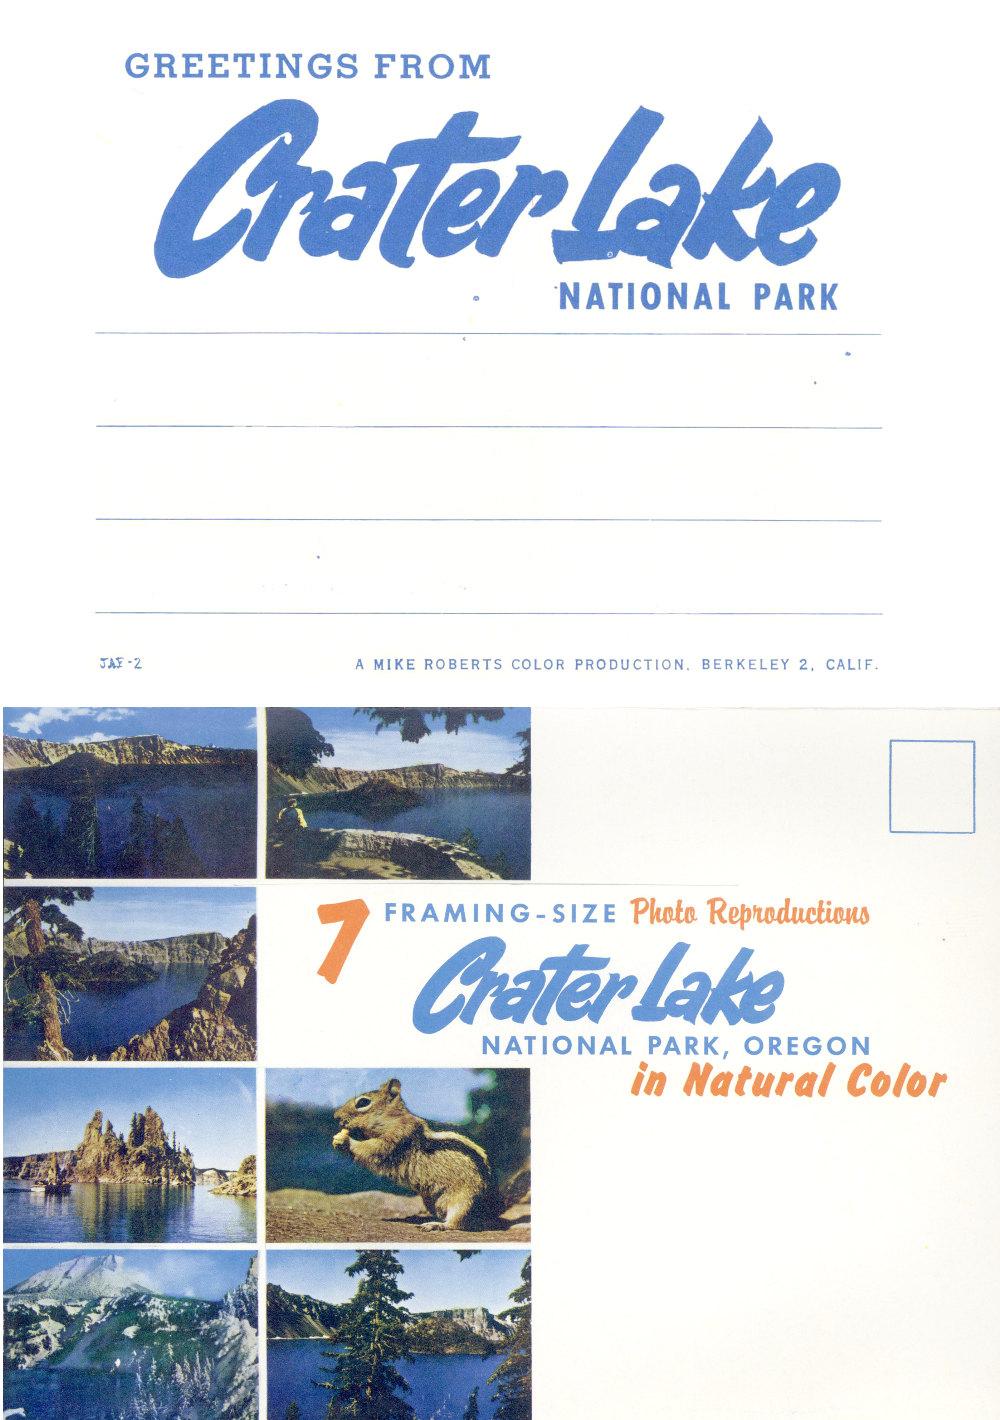 Greetings From Crater Lake National Park